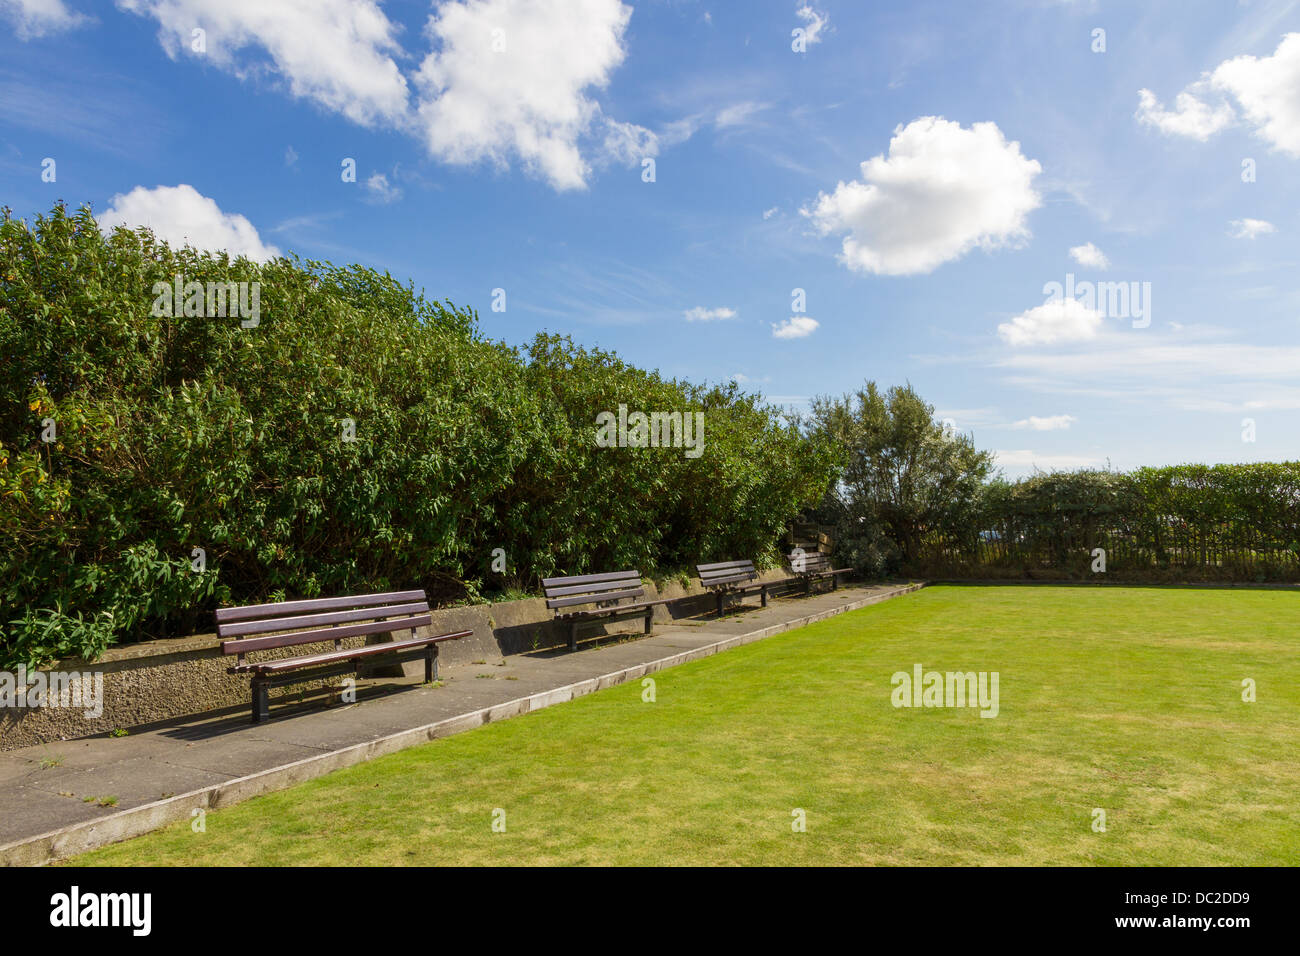 Wooden benches by the side of a bowling green in Glasson Dock, Lancashire, England. Stock Photo